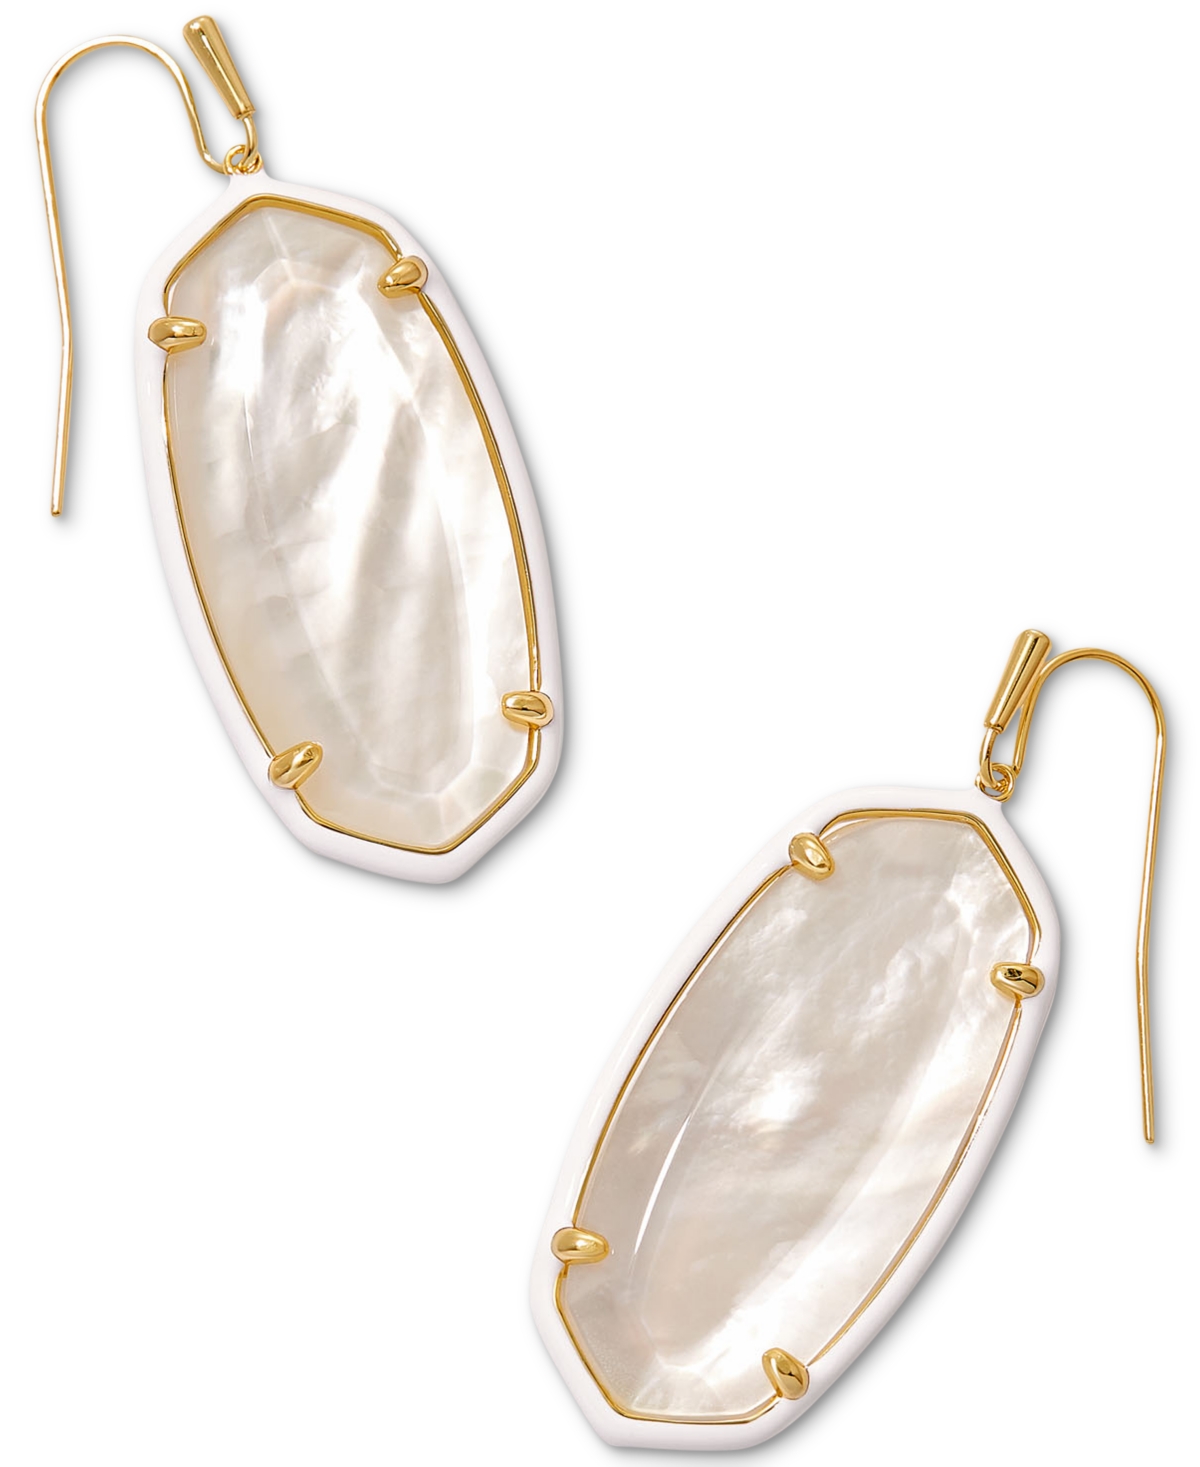 Kendra Scott 14k Gold-plated Color-framed Stone Drop Earrings In Ivory Mix